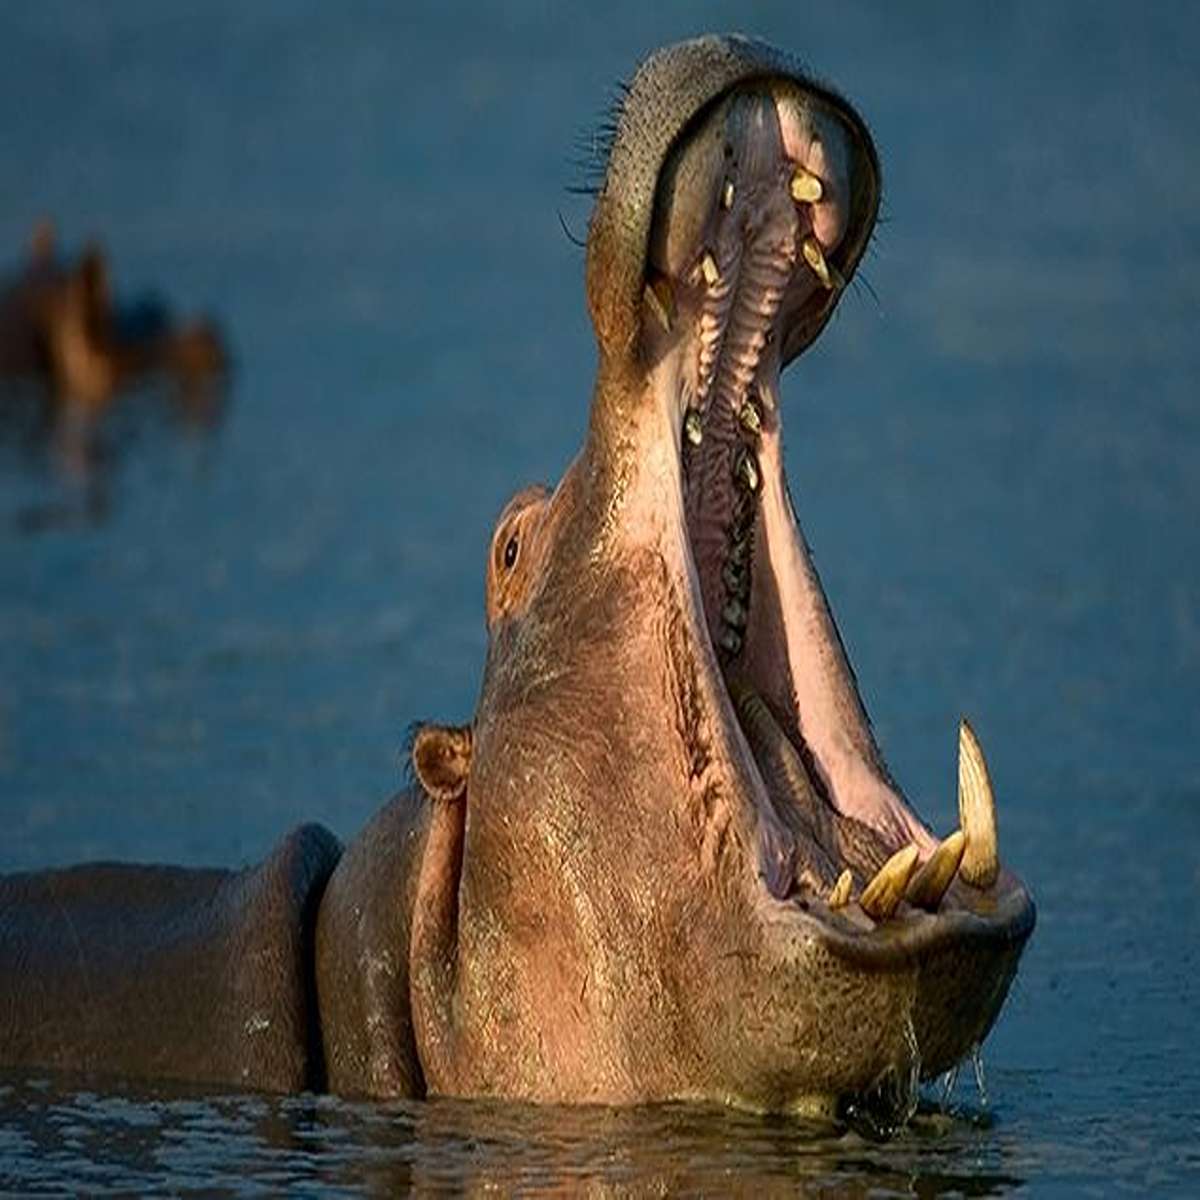 Hippos are responsible for about 500 human deaths a year. They are way more likely to kill you than a crocodile. And they like to fling their [poop] at each other because they think it's funny.